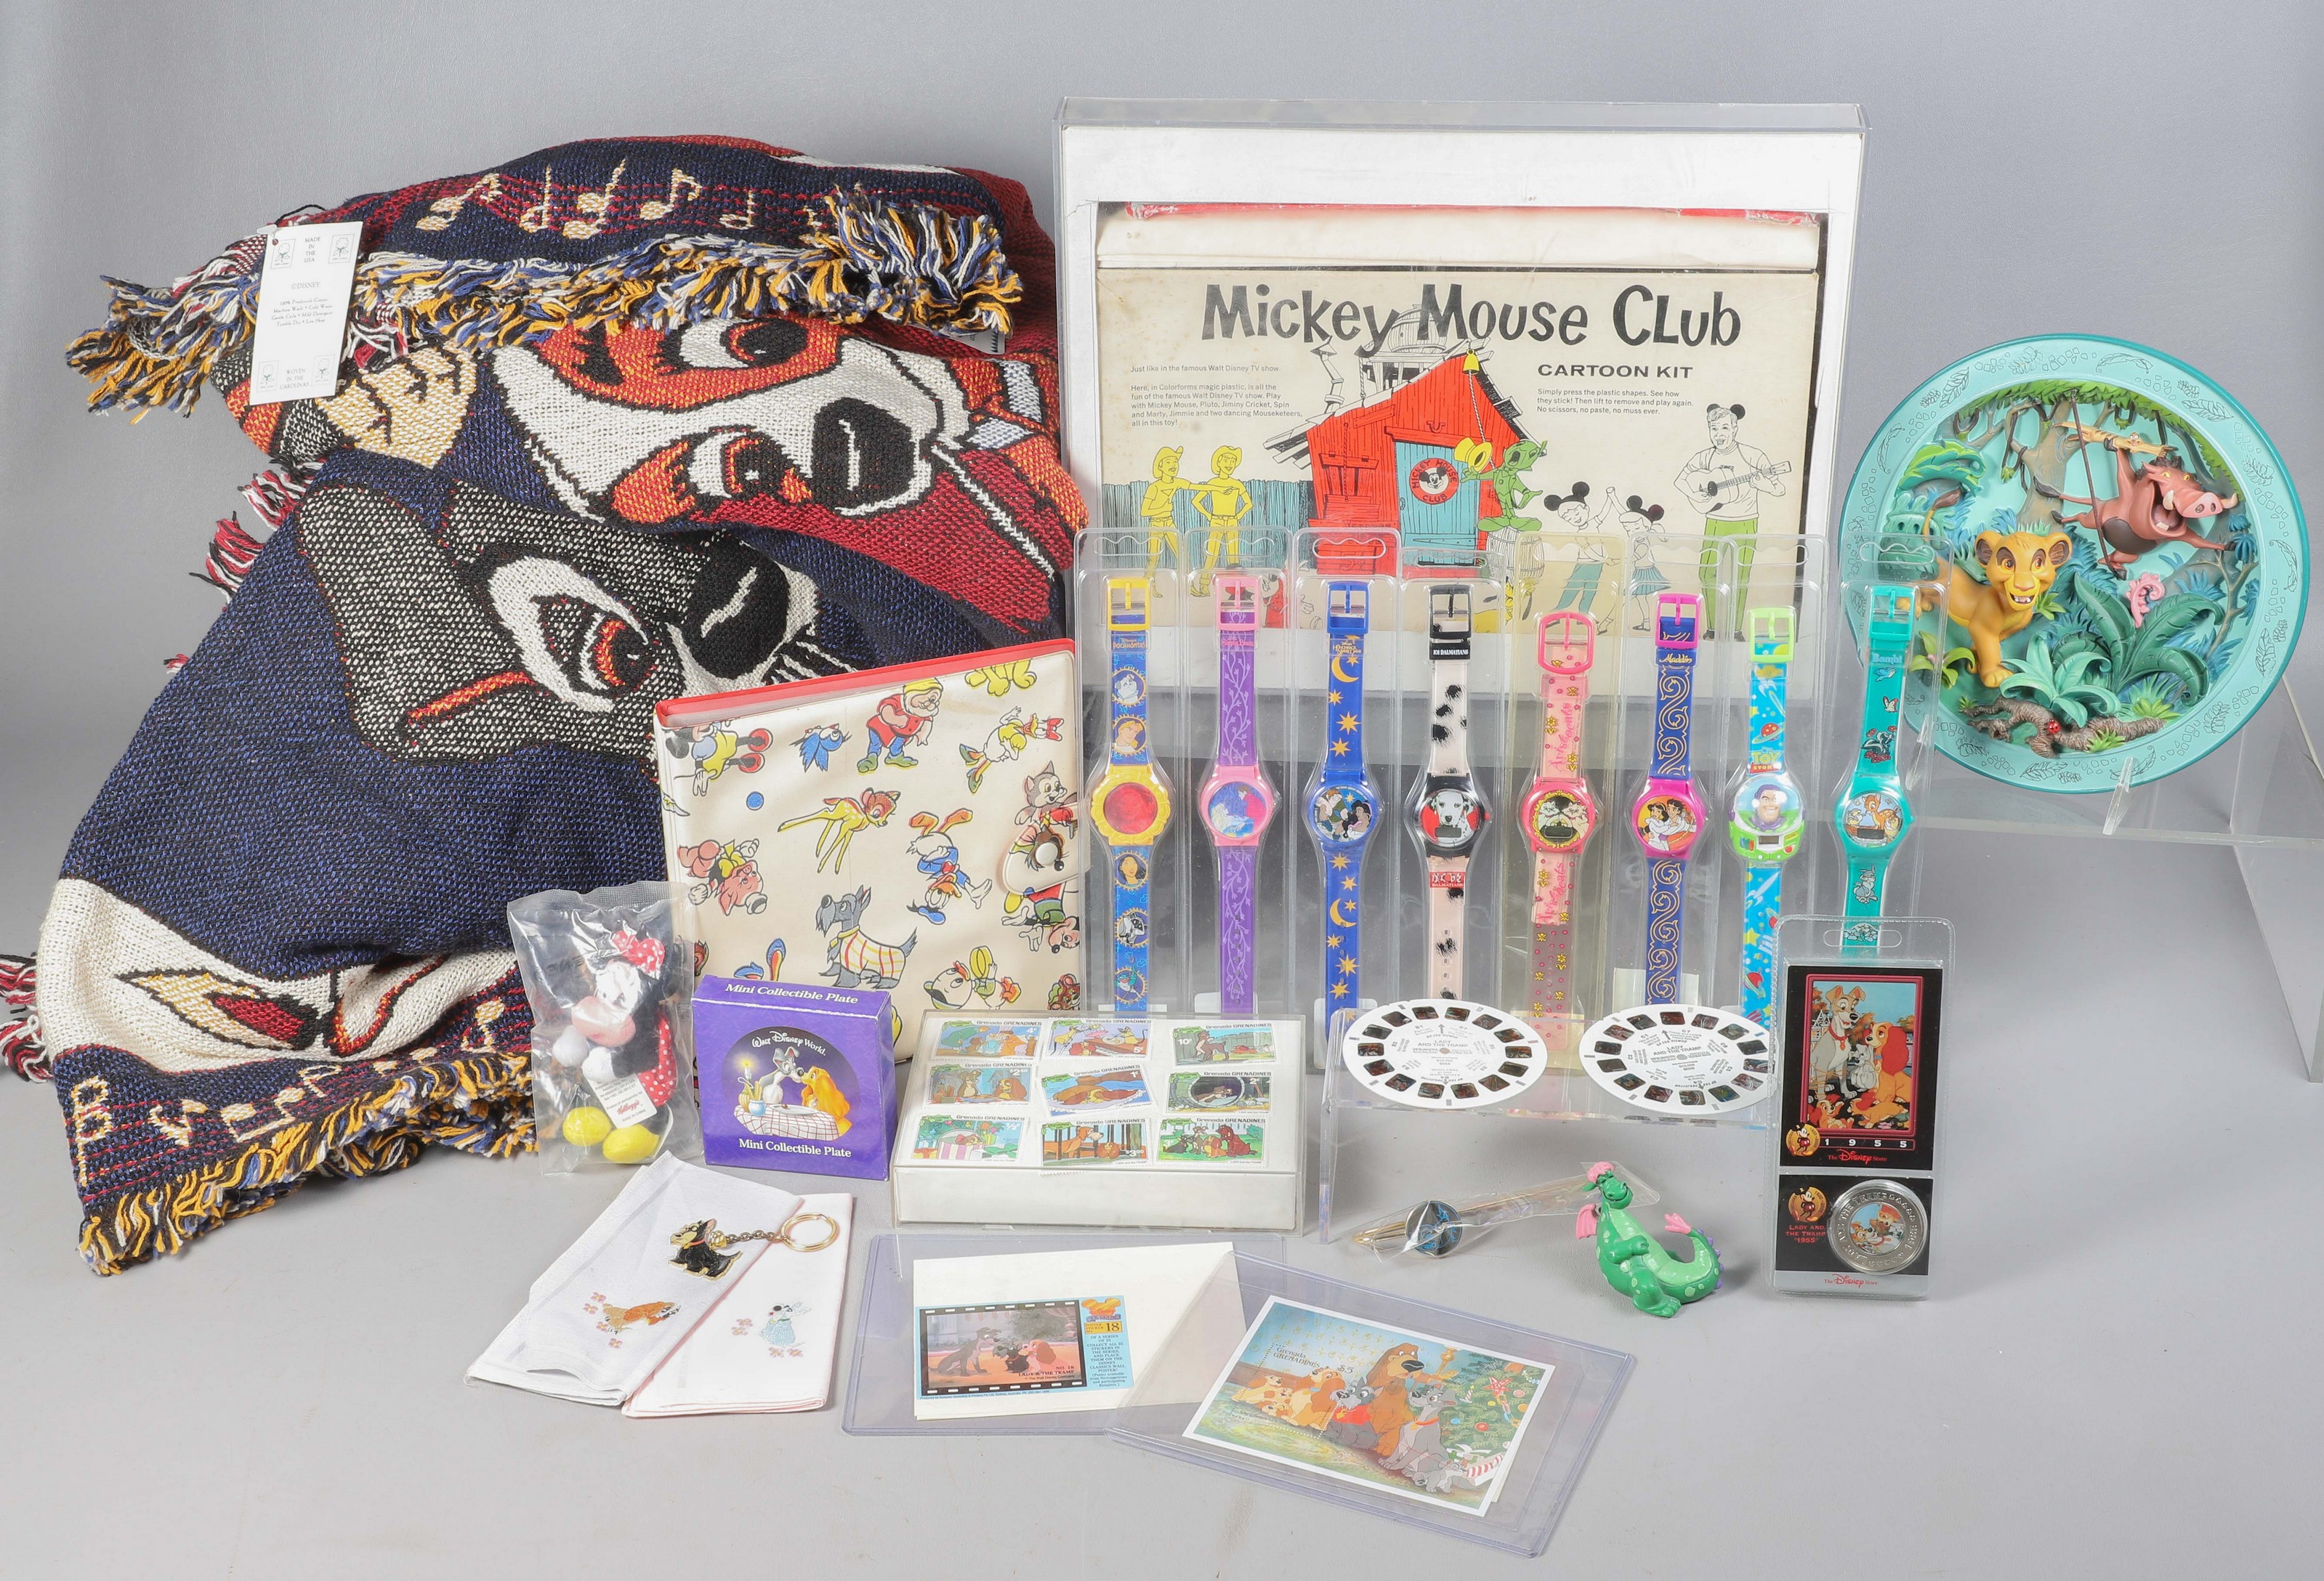 Large lot of Disney items, including